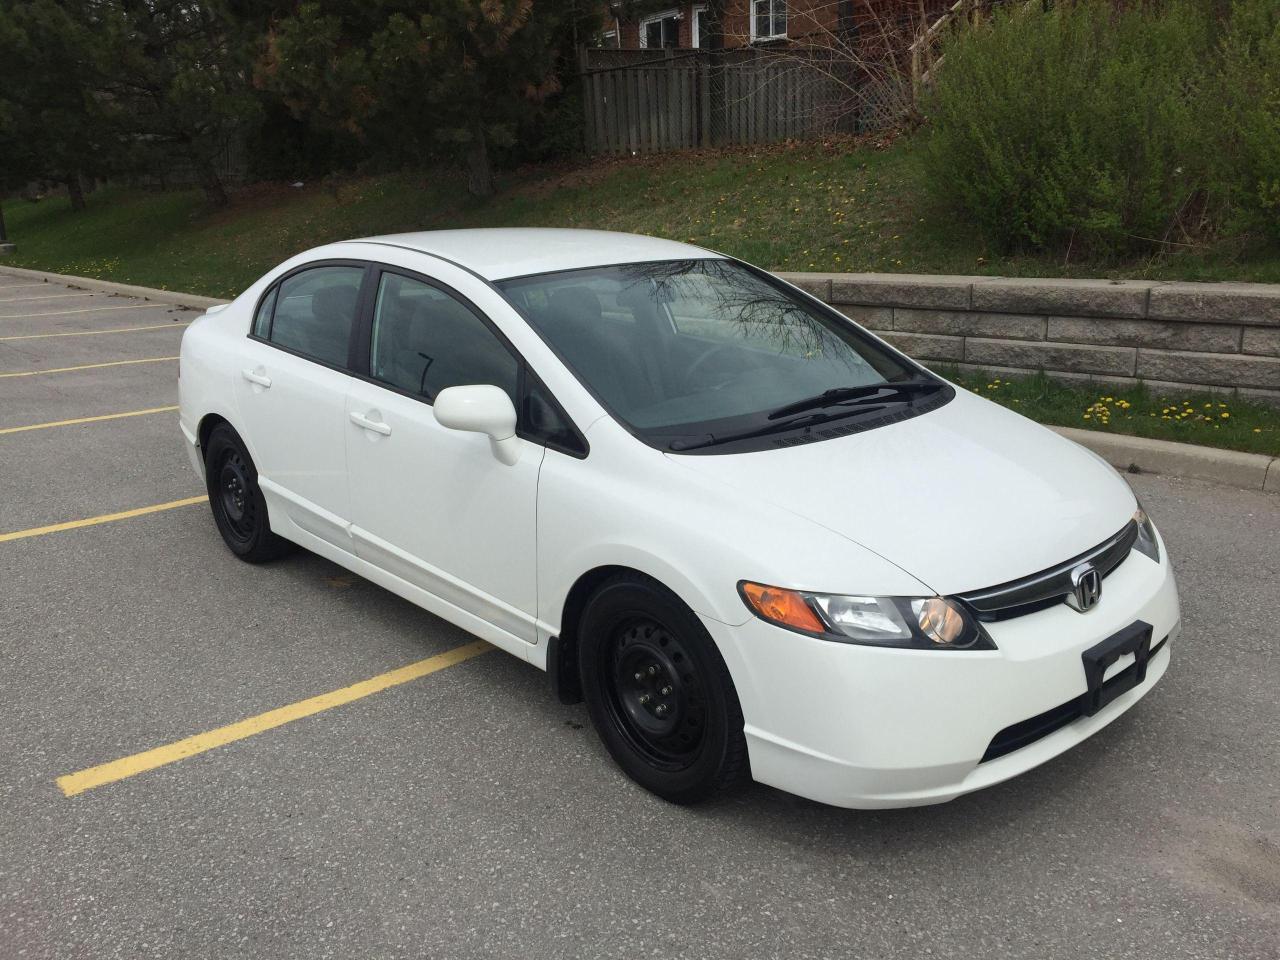 2008 Honda Civic LX-ONLY 91,541 KMS! 1 FEMALE OWNER-NO CLAIMS! - Photo #1